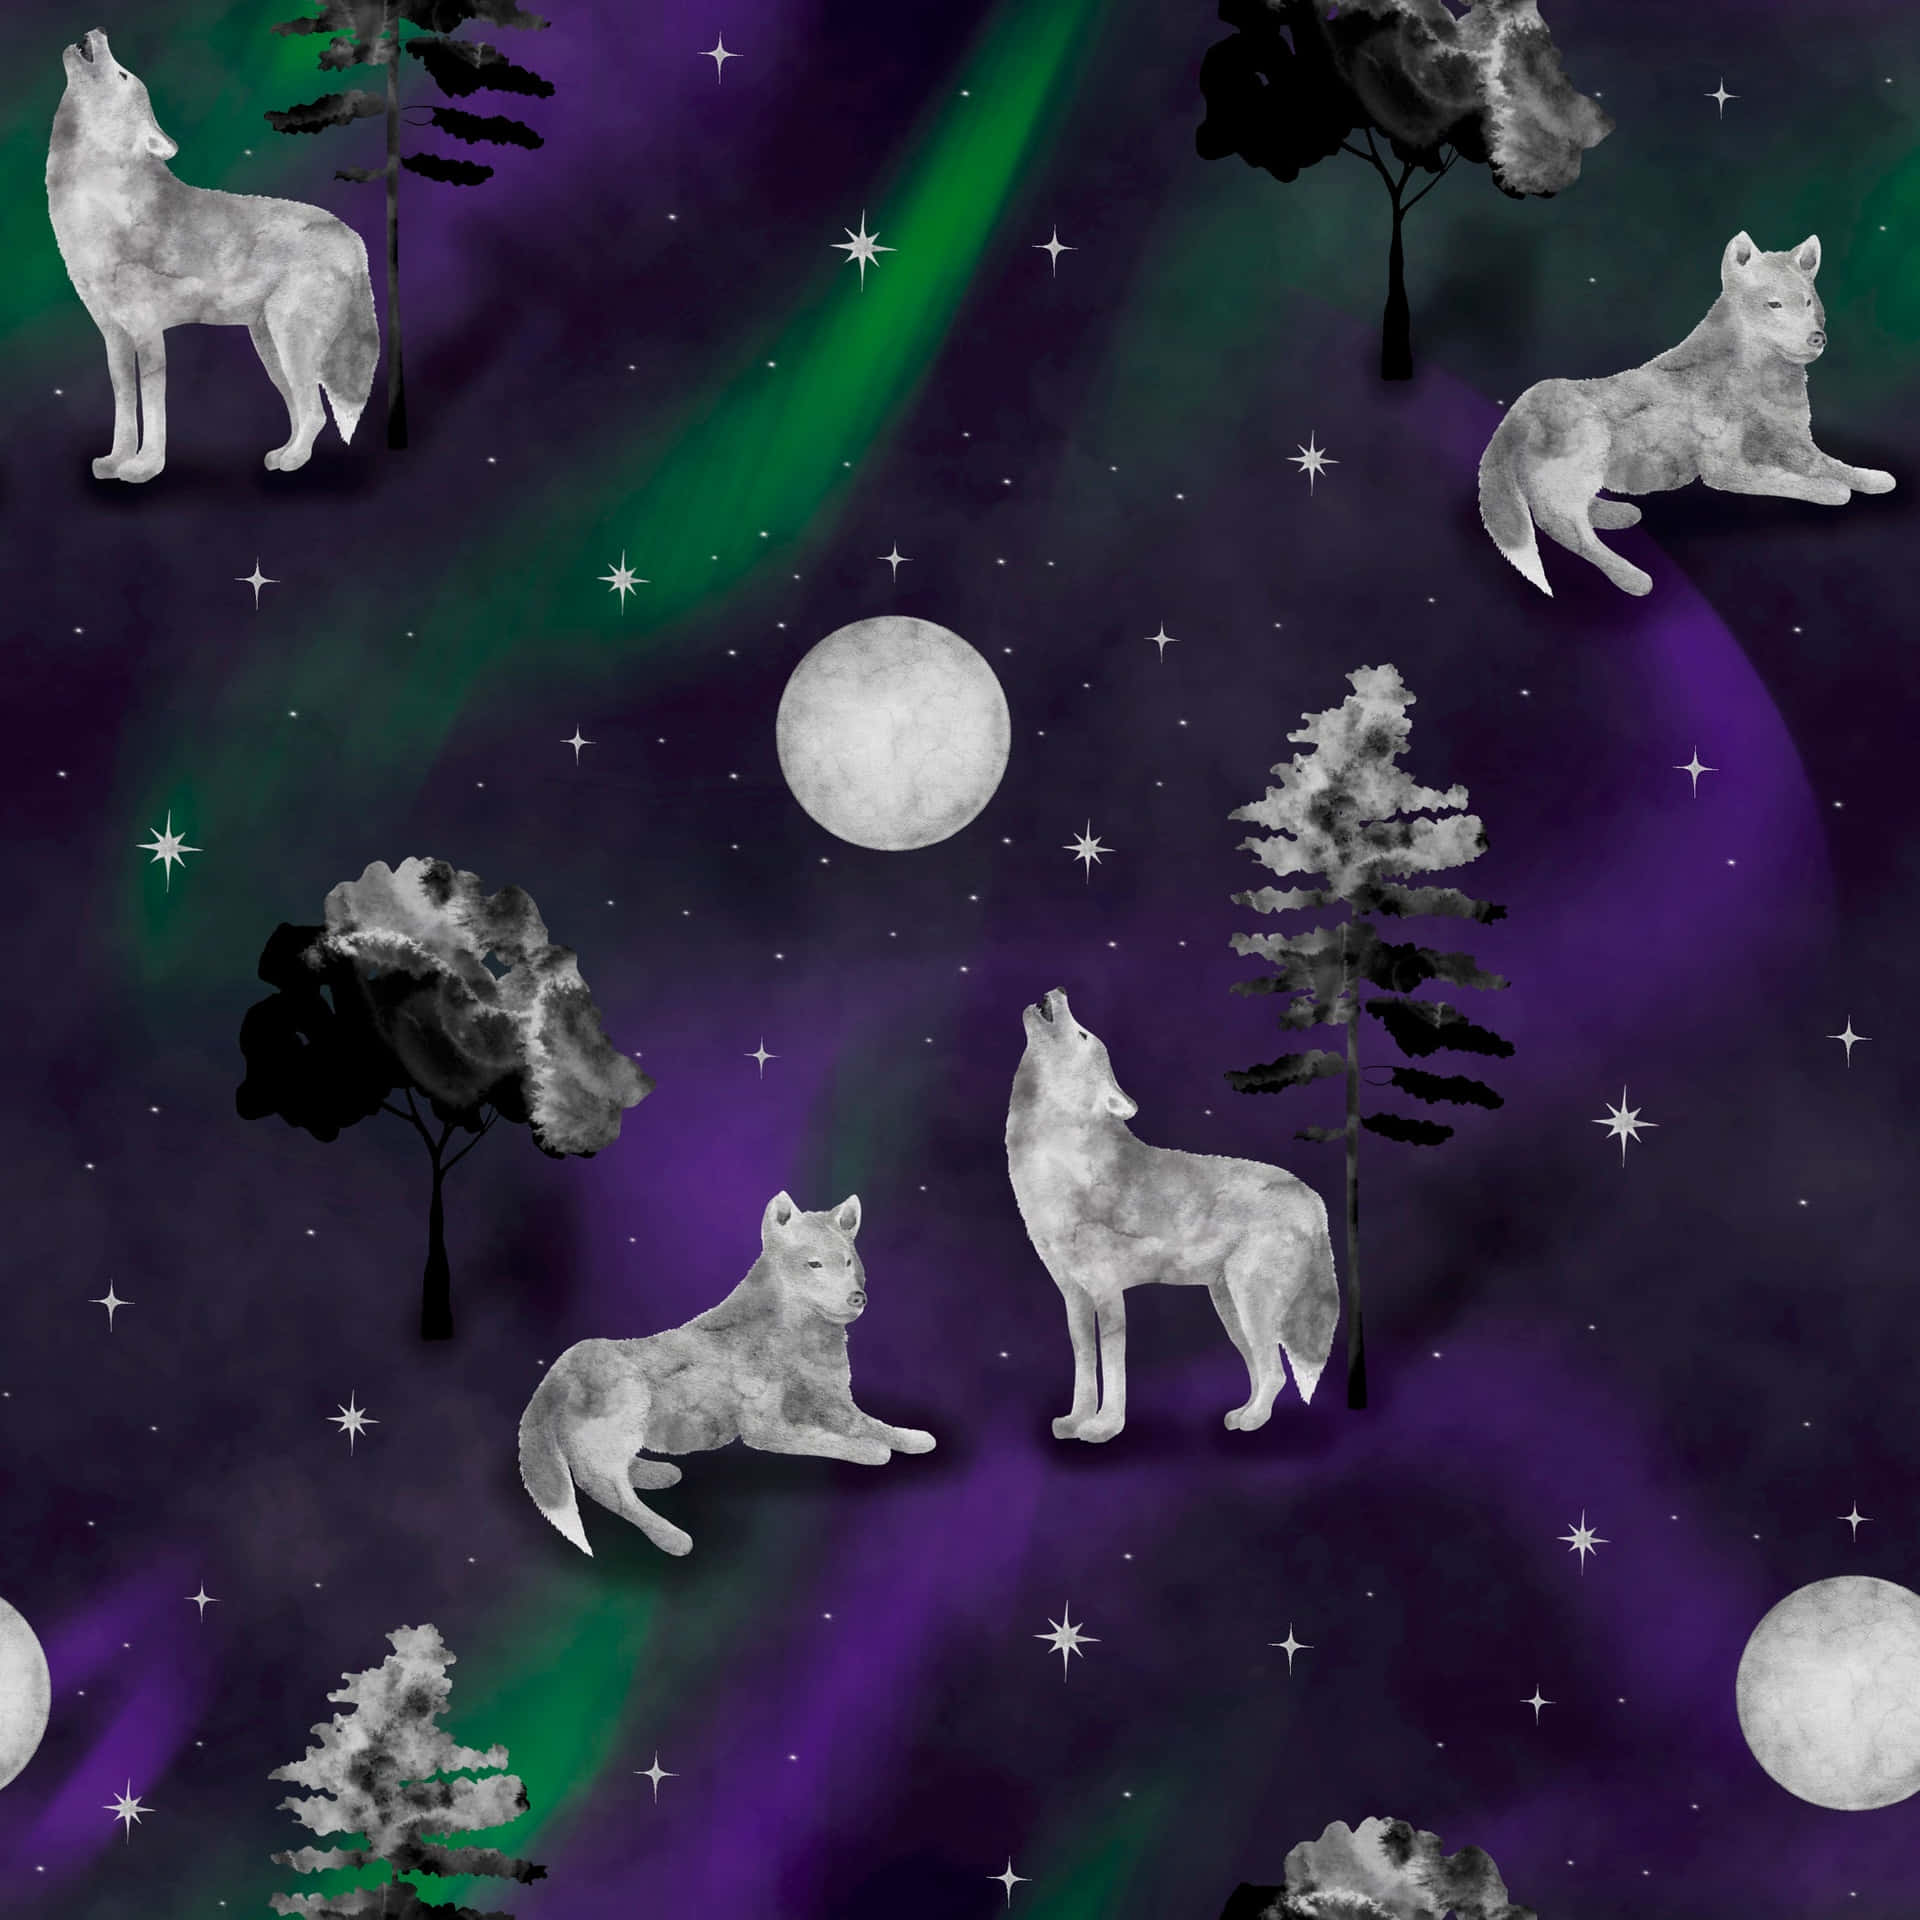 The pink wolf stands majestically in the wilderness, captivating all who witness its mysterious beauty. Wallpaper